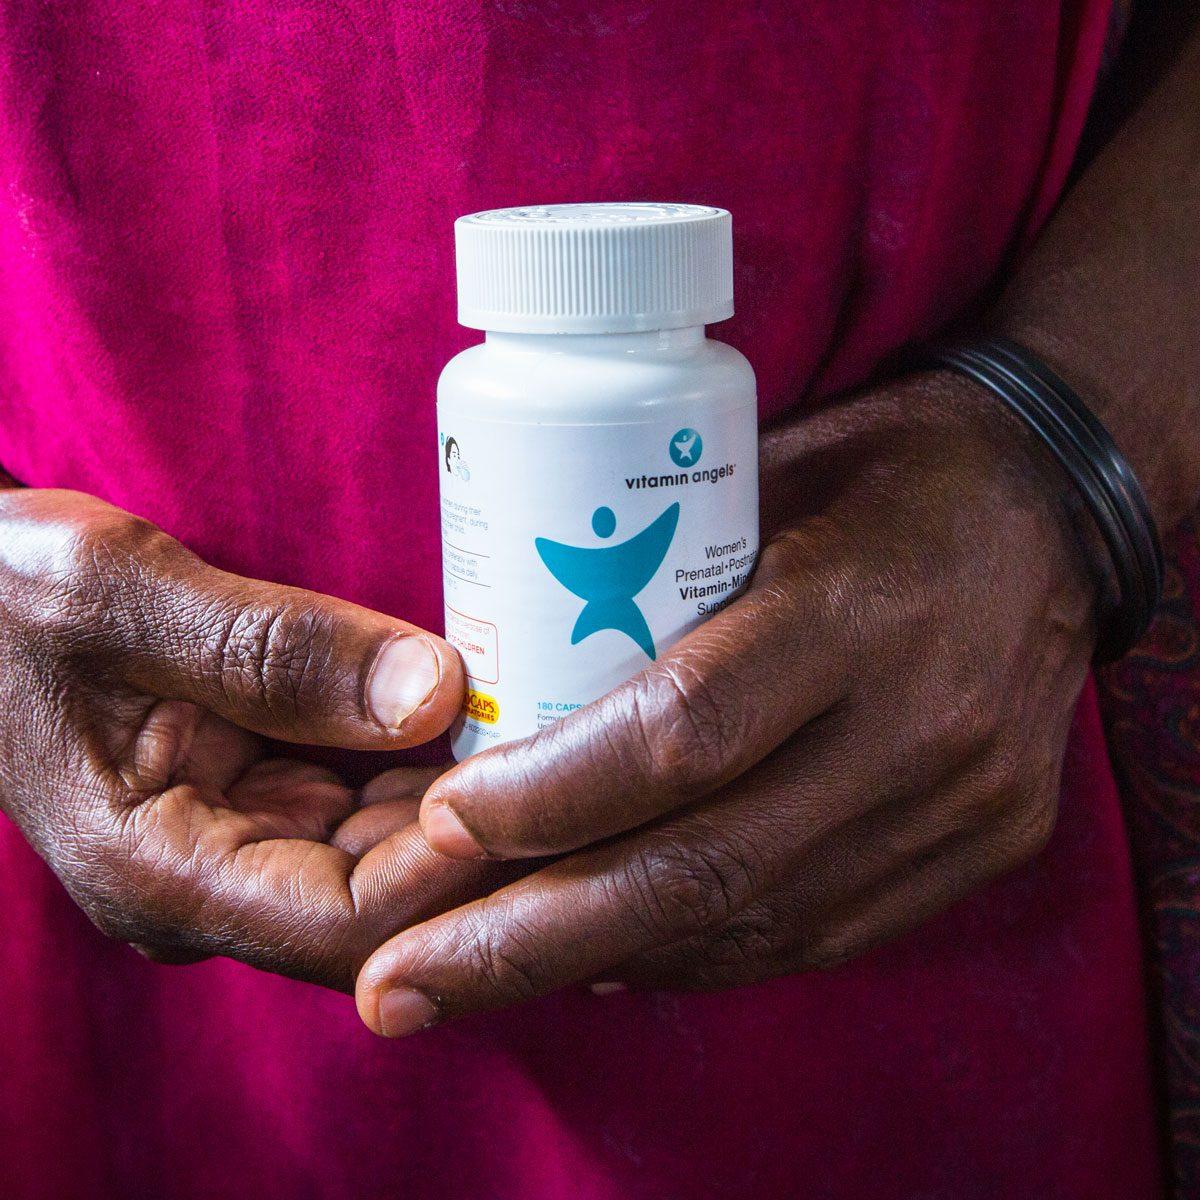 A dark-skinned person is holding a bottle of Vitamin Angels prenatal vitamins in their hands.